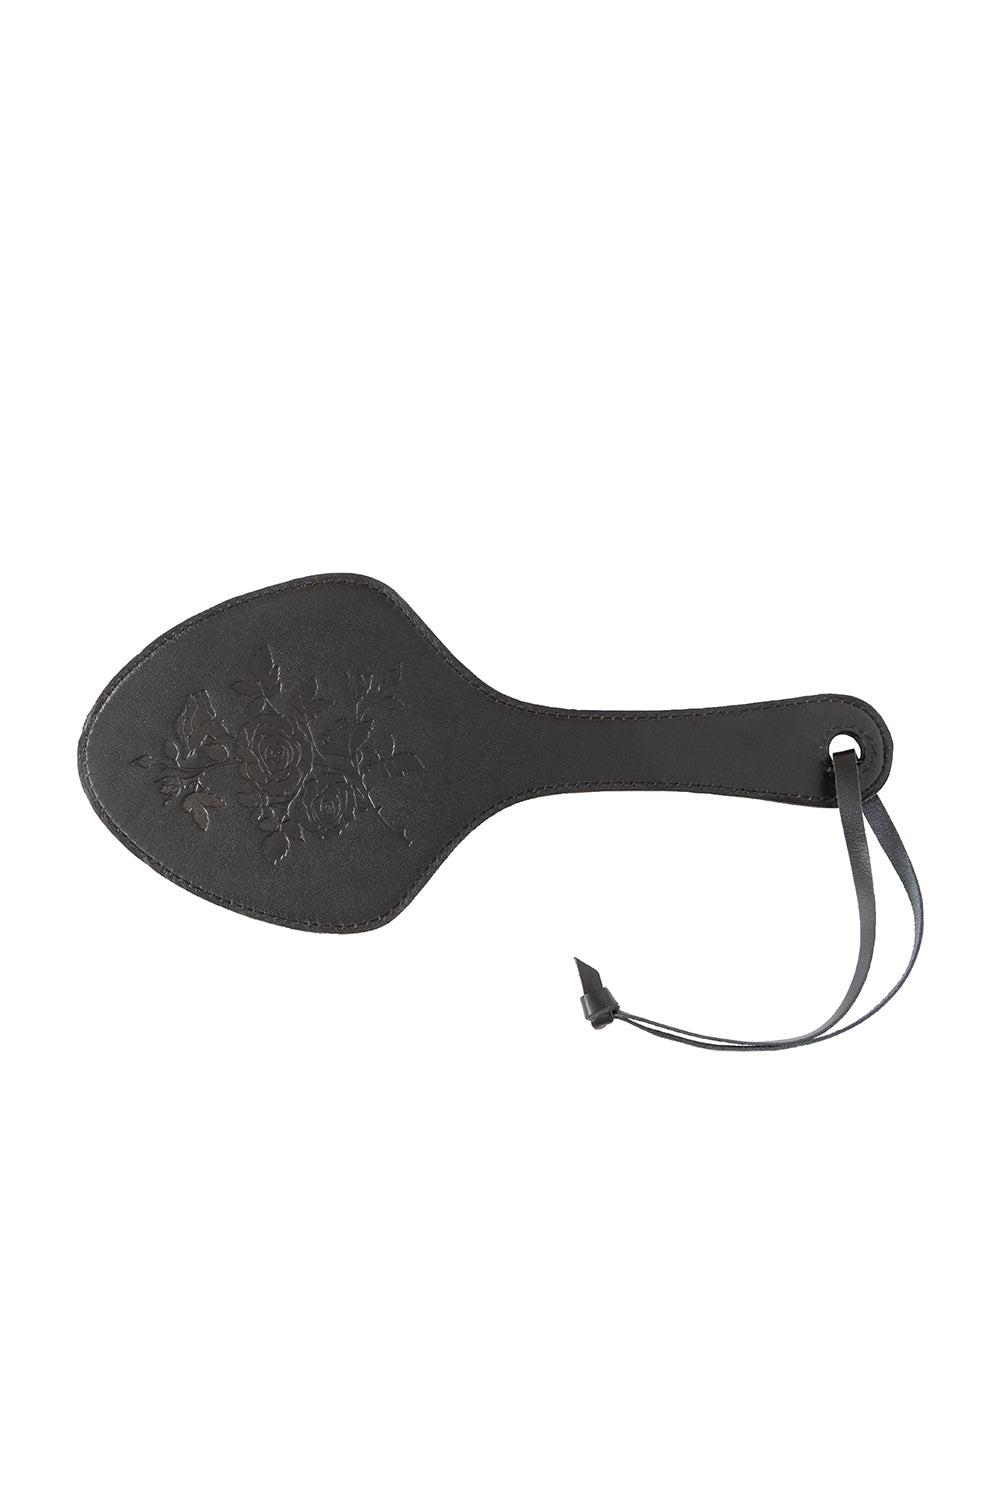 Genuine Leather Spanking Paddle. 10 colors